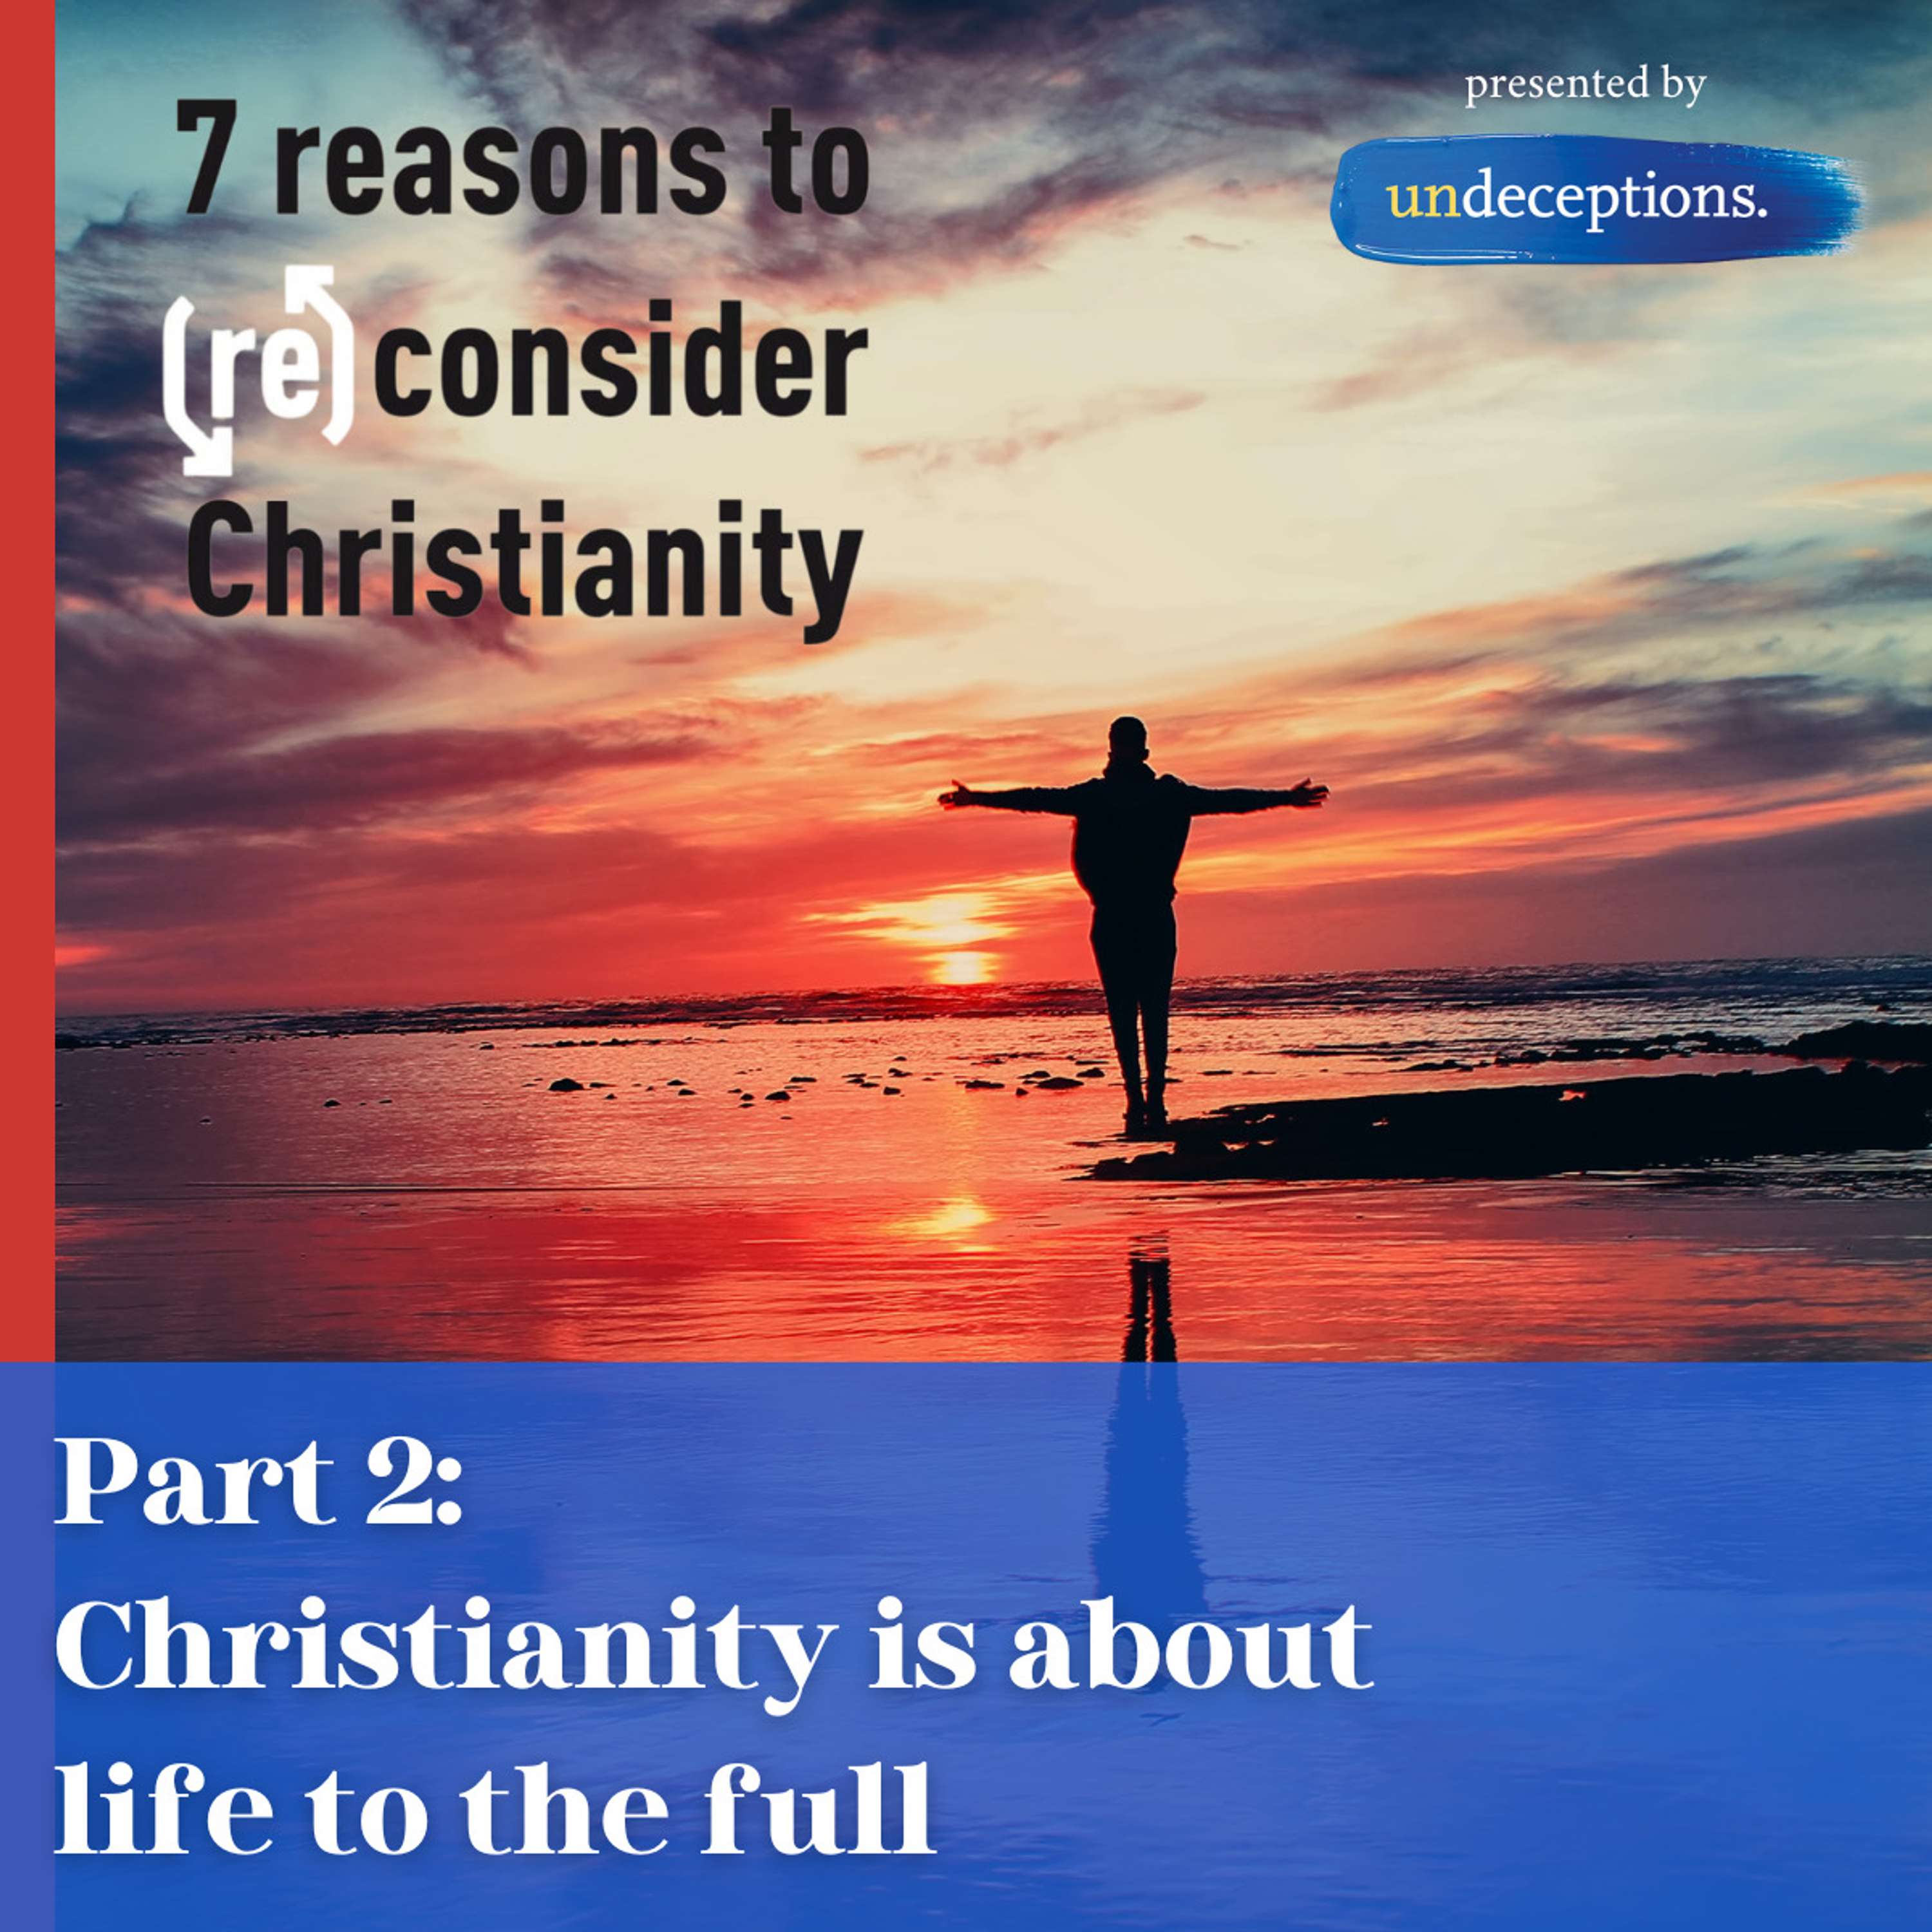 Single: Christianity is about life to the full